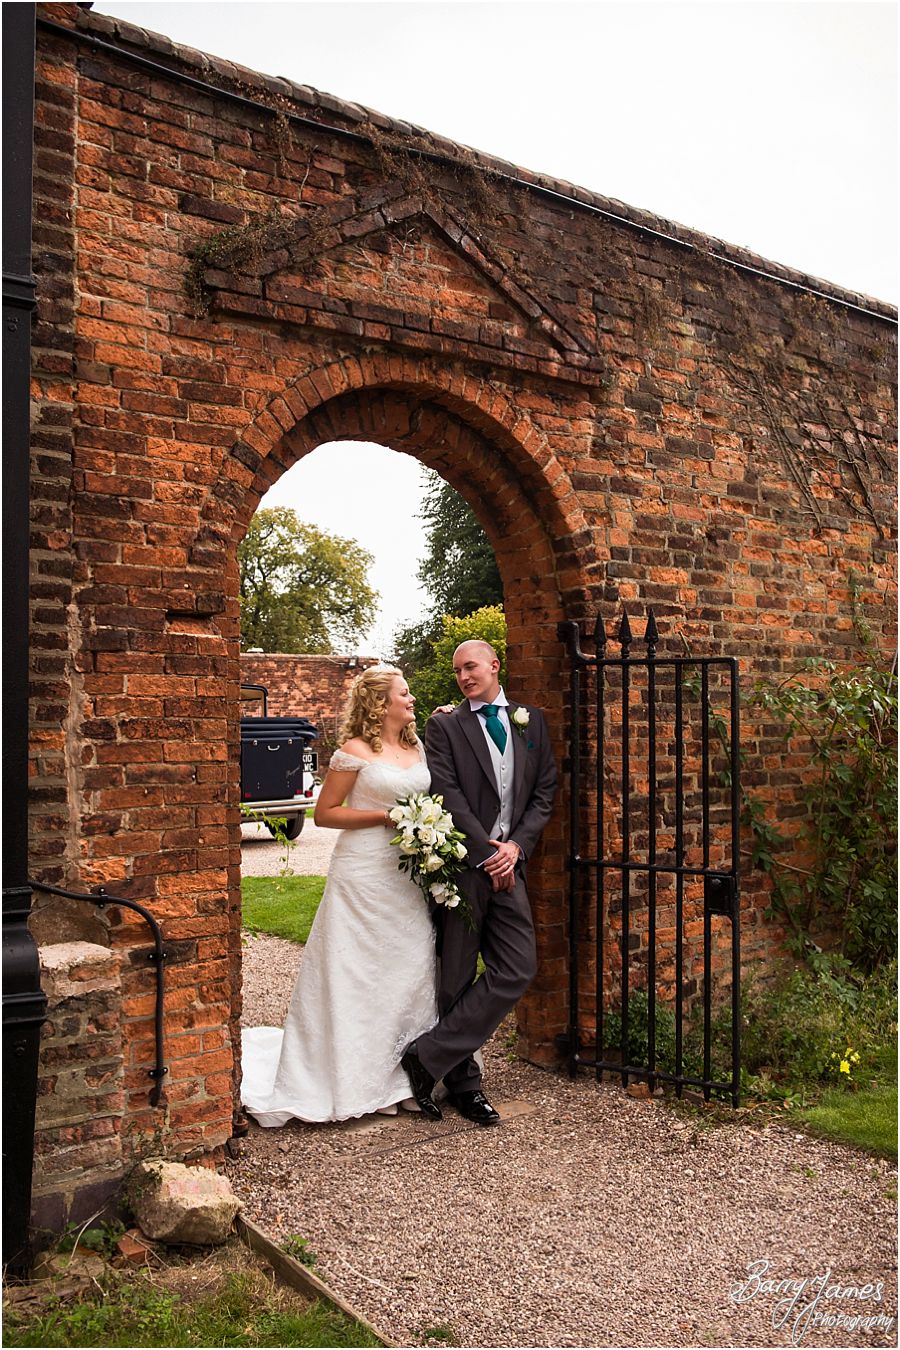 Contemporary and candid wedding photos at Castle Bromwich Hall Hotel in Birmingham by Contemporary Candid and Creative Wedding Photographer Barry James